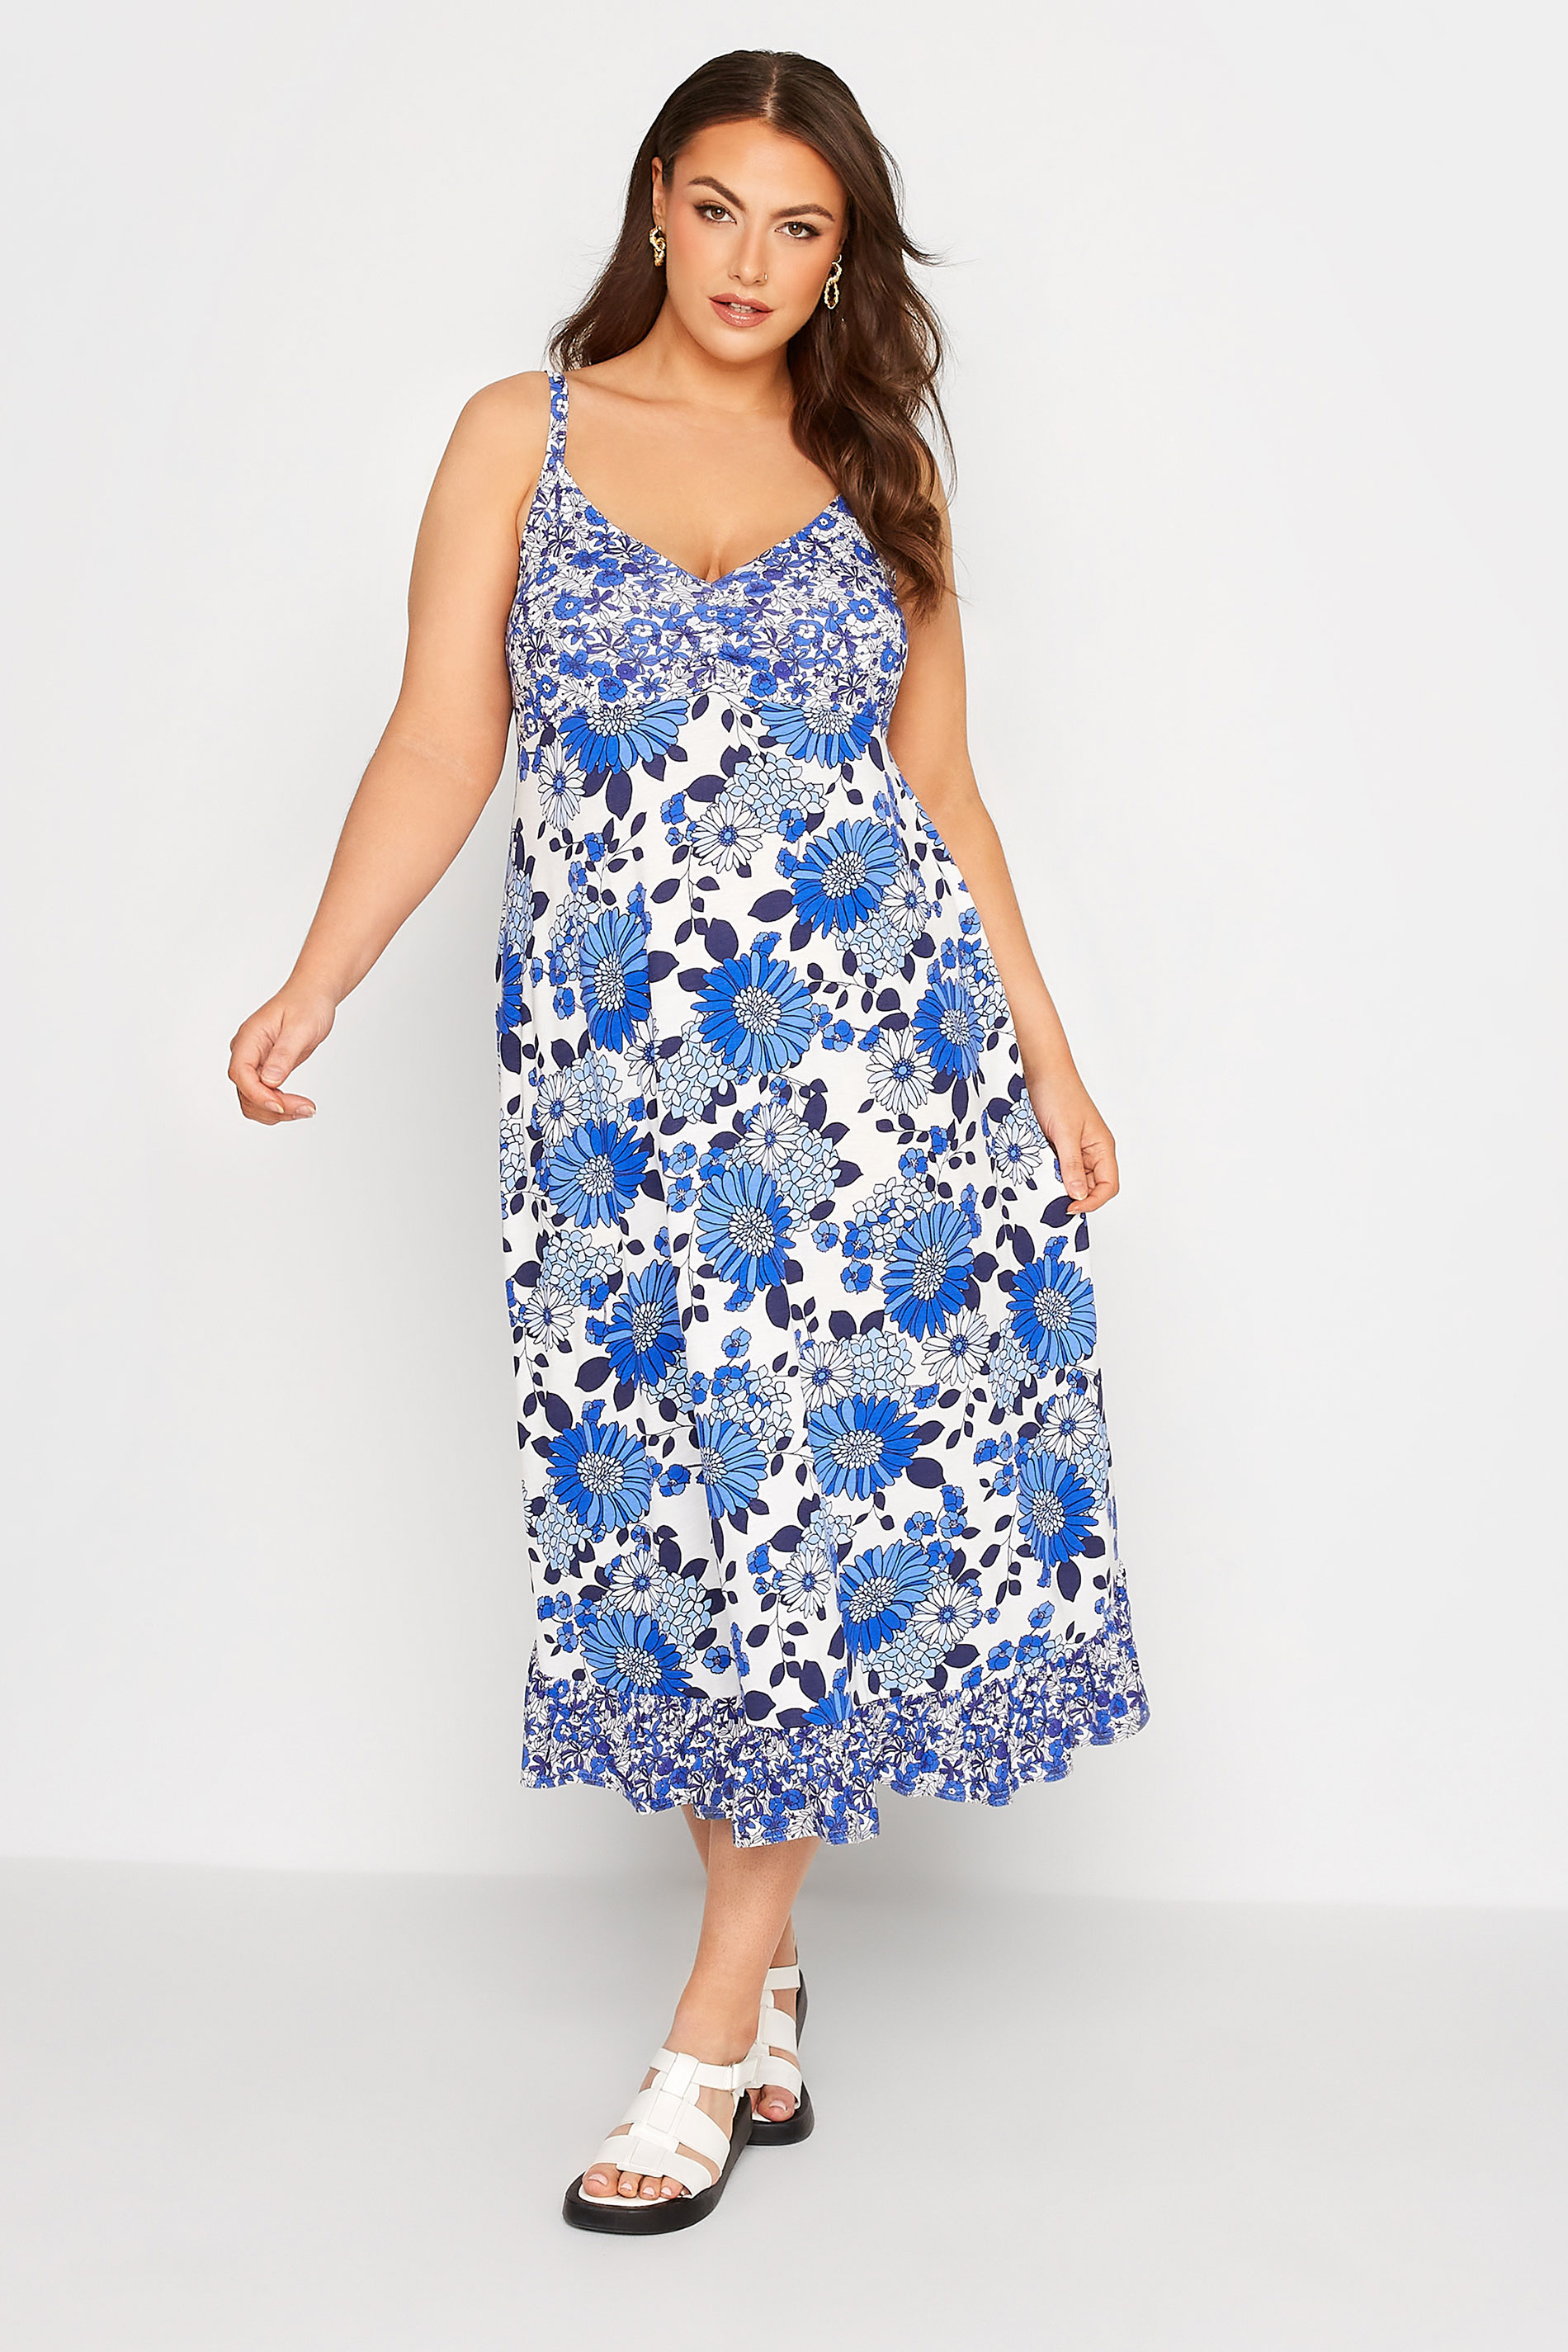 LIMITED COLLECTION Curve Blue Floral Print Frill Midaxi Sundress_A.jpg